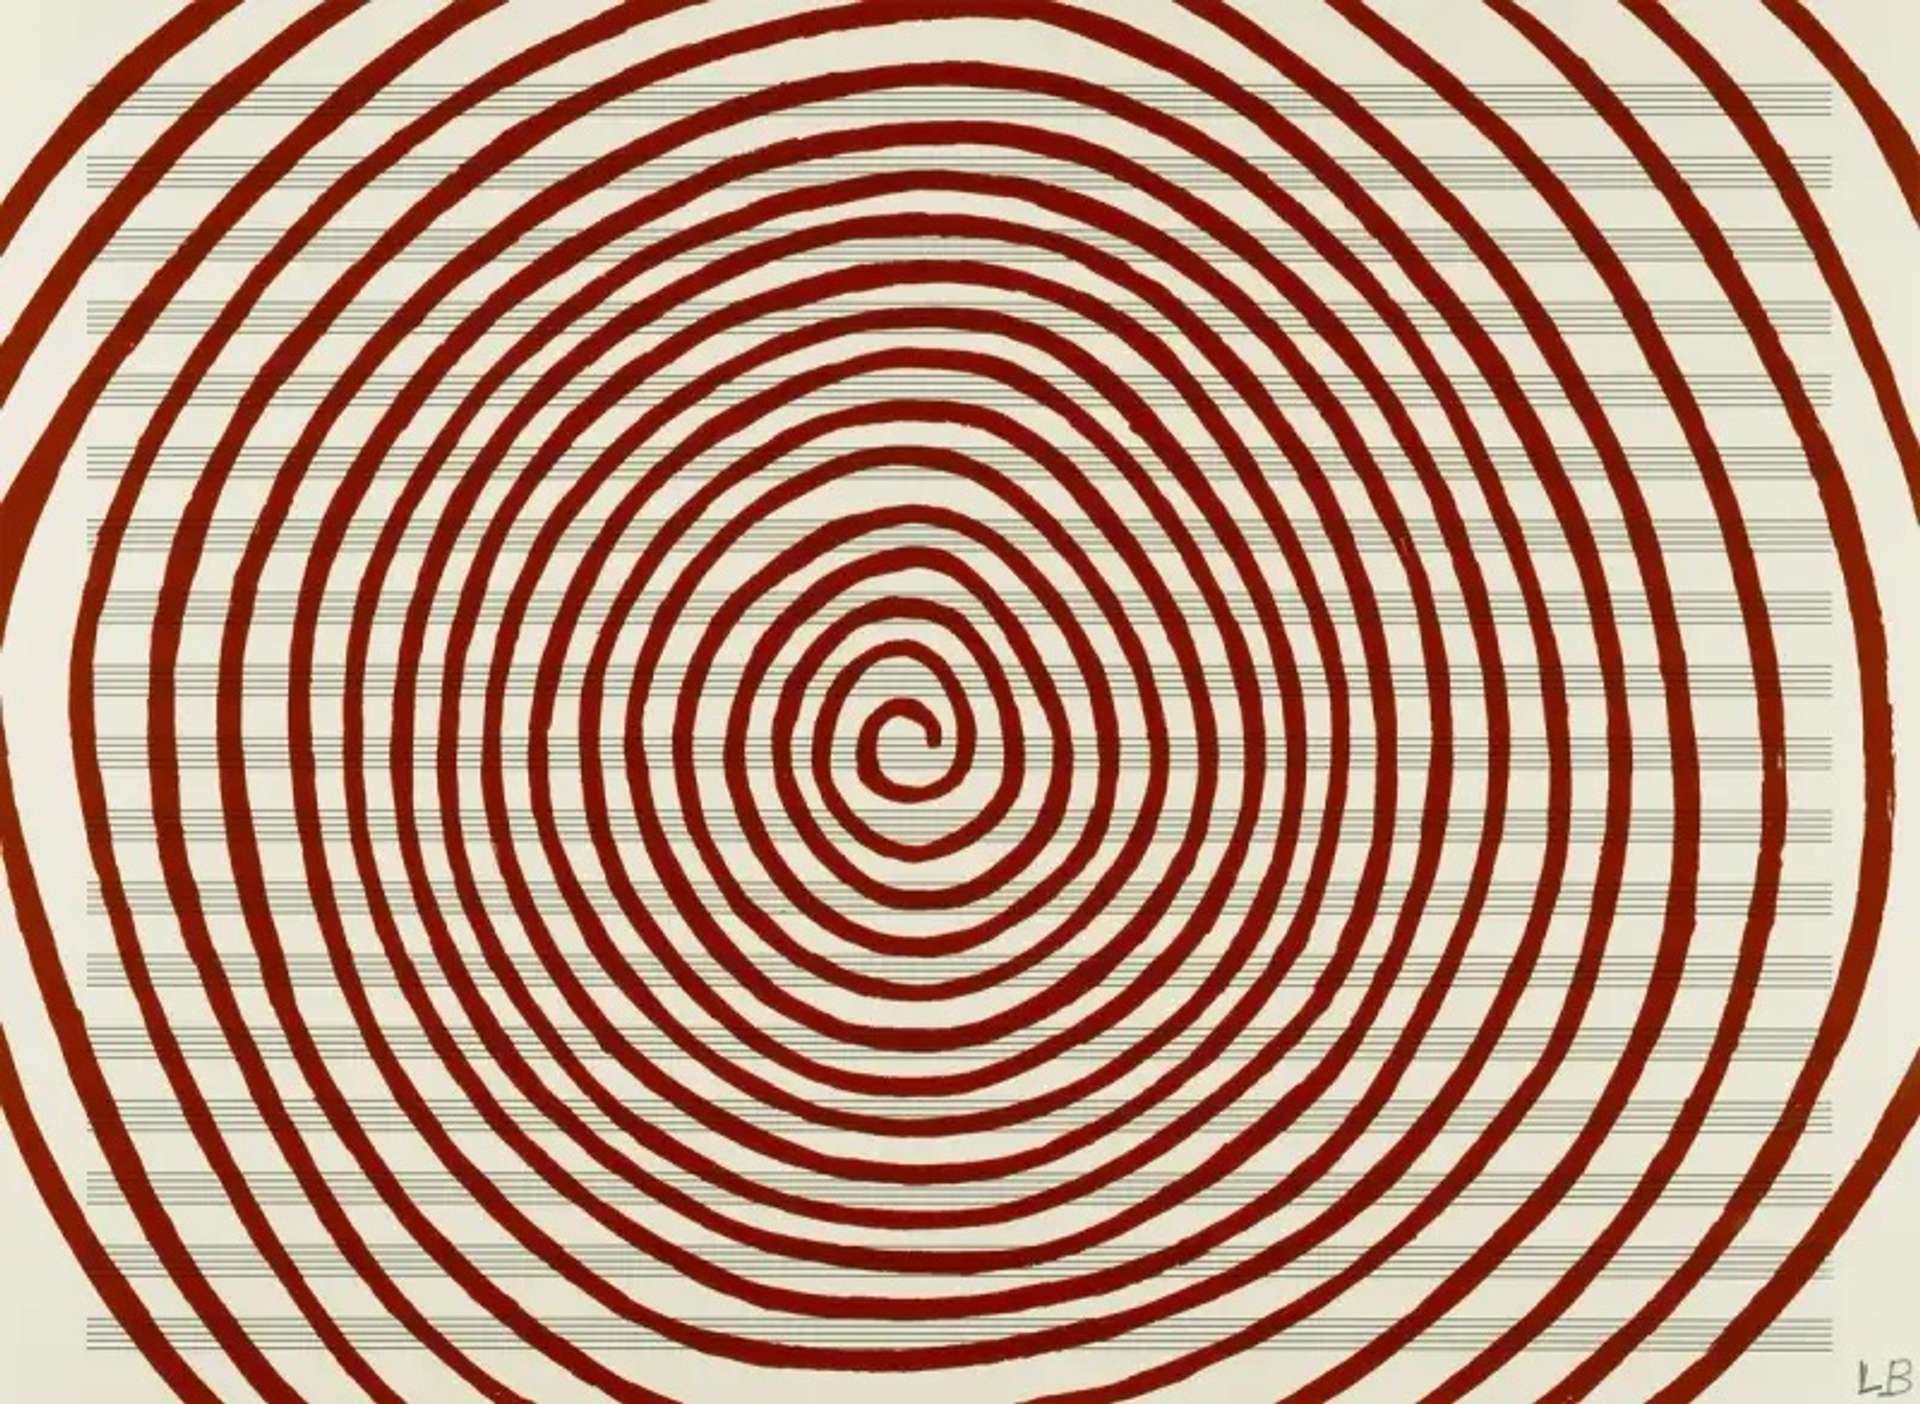 Louise Bourgeois’ Untitled #11. A screenprint of a continuous red spiral against a sheet of horizontal lines.Louise Bourgeois’ Untitled #11. A screenprint of a continuous red spiral against a sheet of horizontal lines.